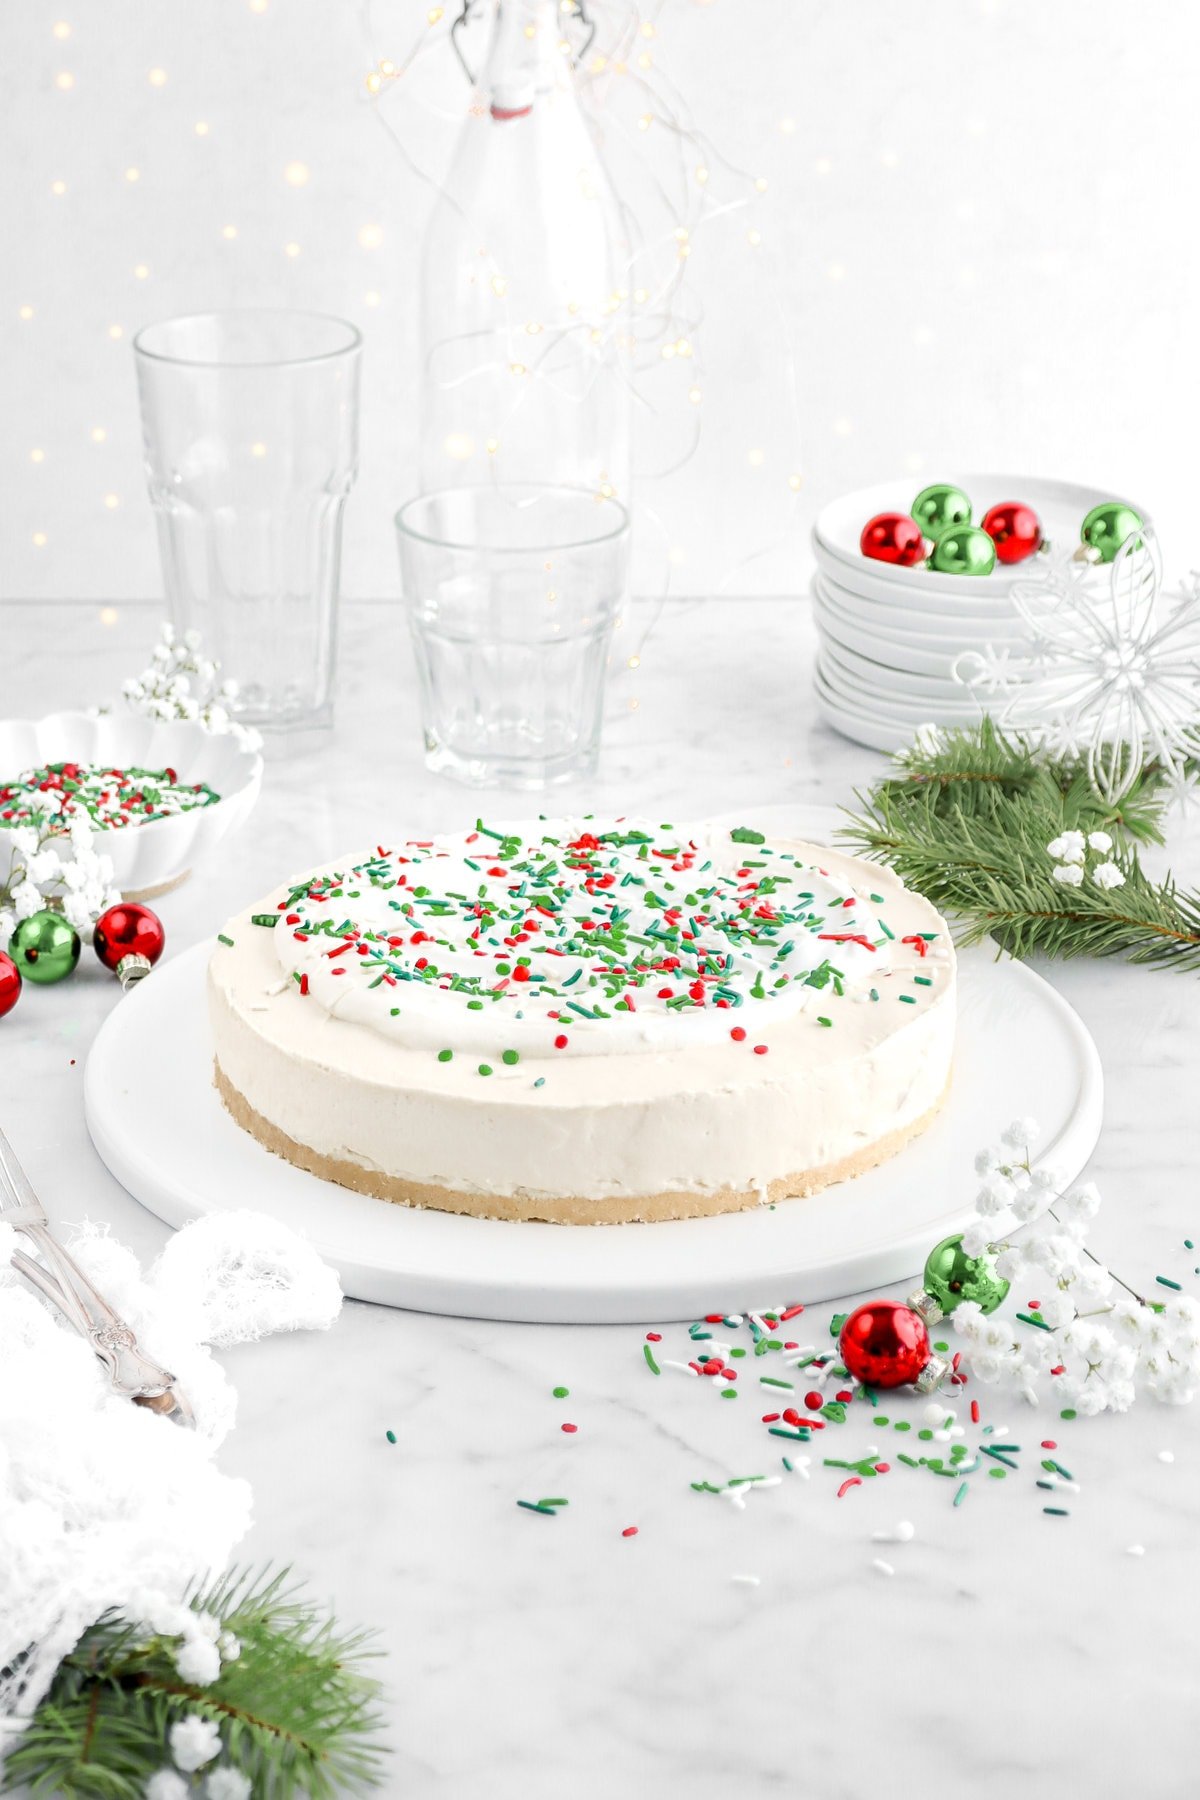 cheesecake on serving tray with red, white, and green sprinkles on top with greenery and red and green ornaments around.